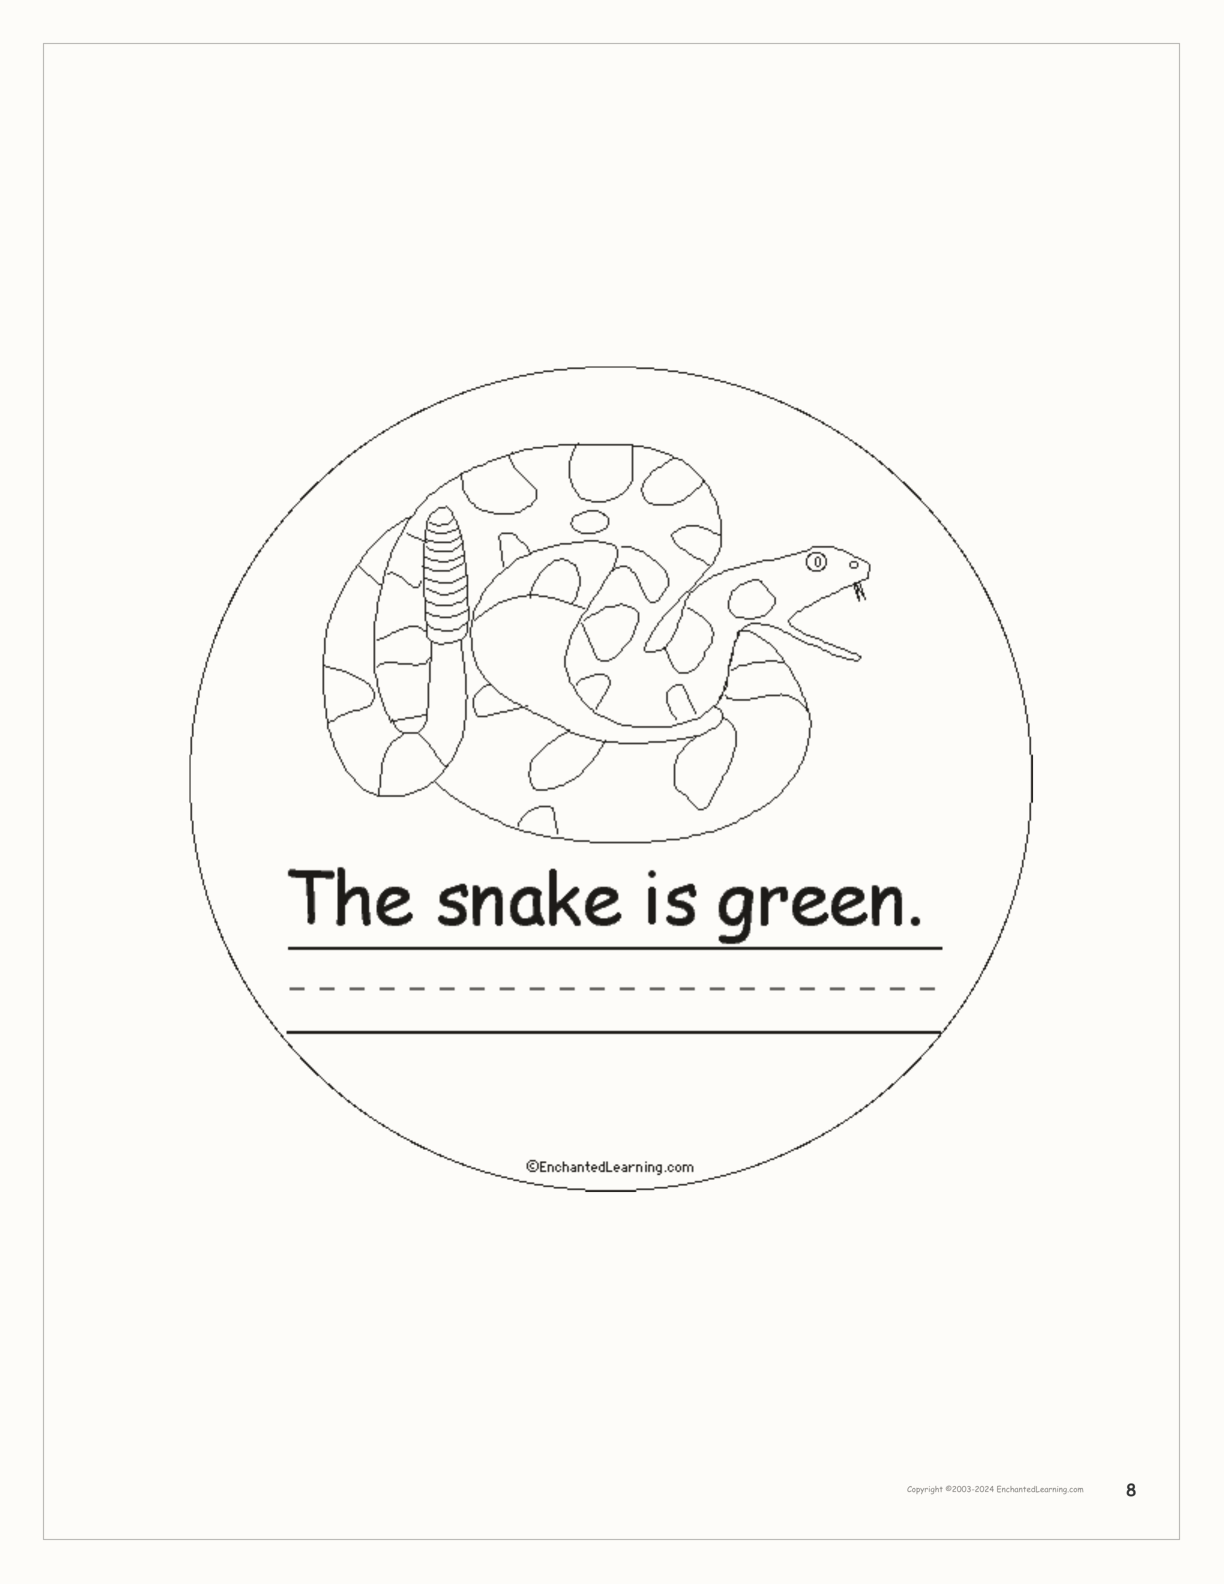 Green Things: Printable Color Book interactive worksheet page 8